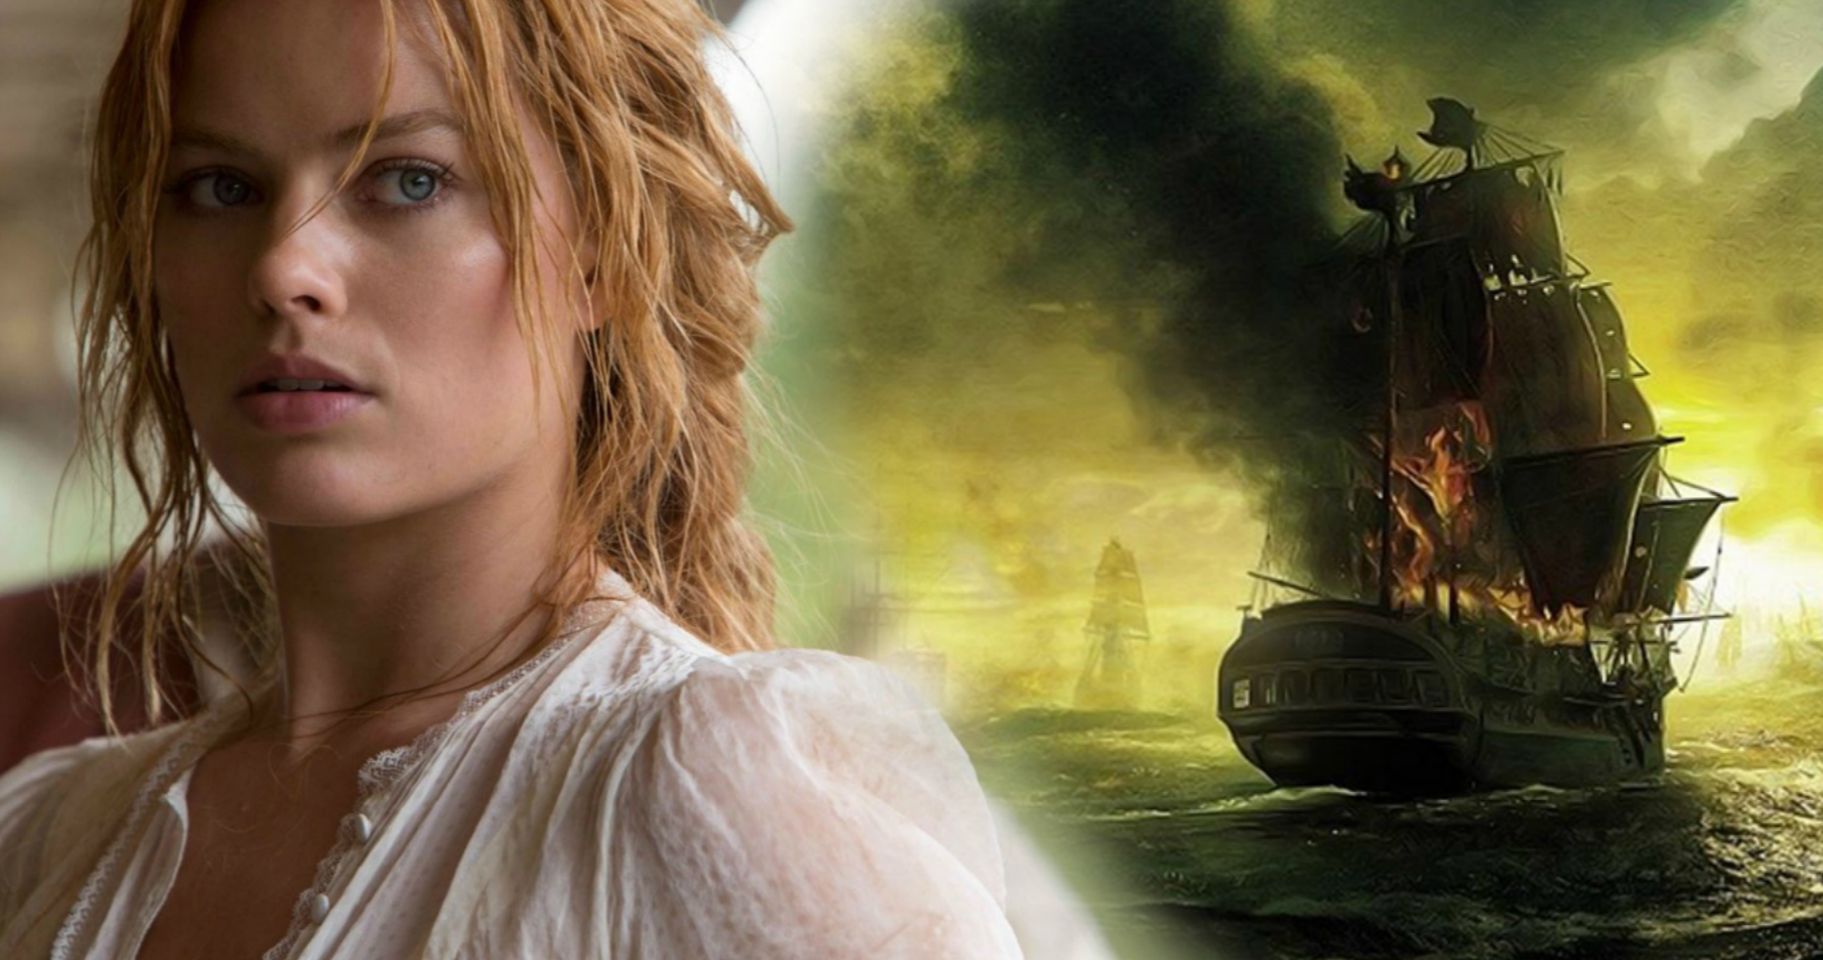 Margot Robbie Takes the Lead in New Pirates of the Caribbean Movie